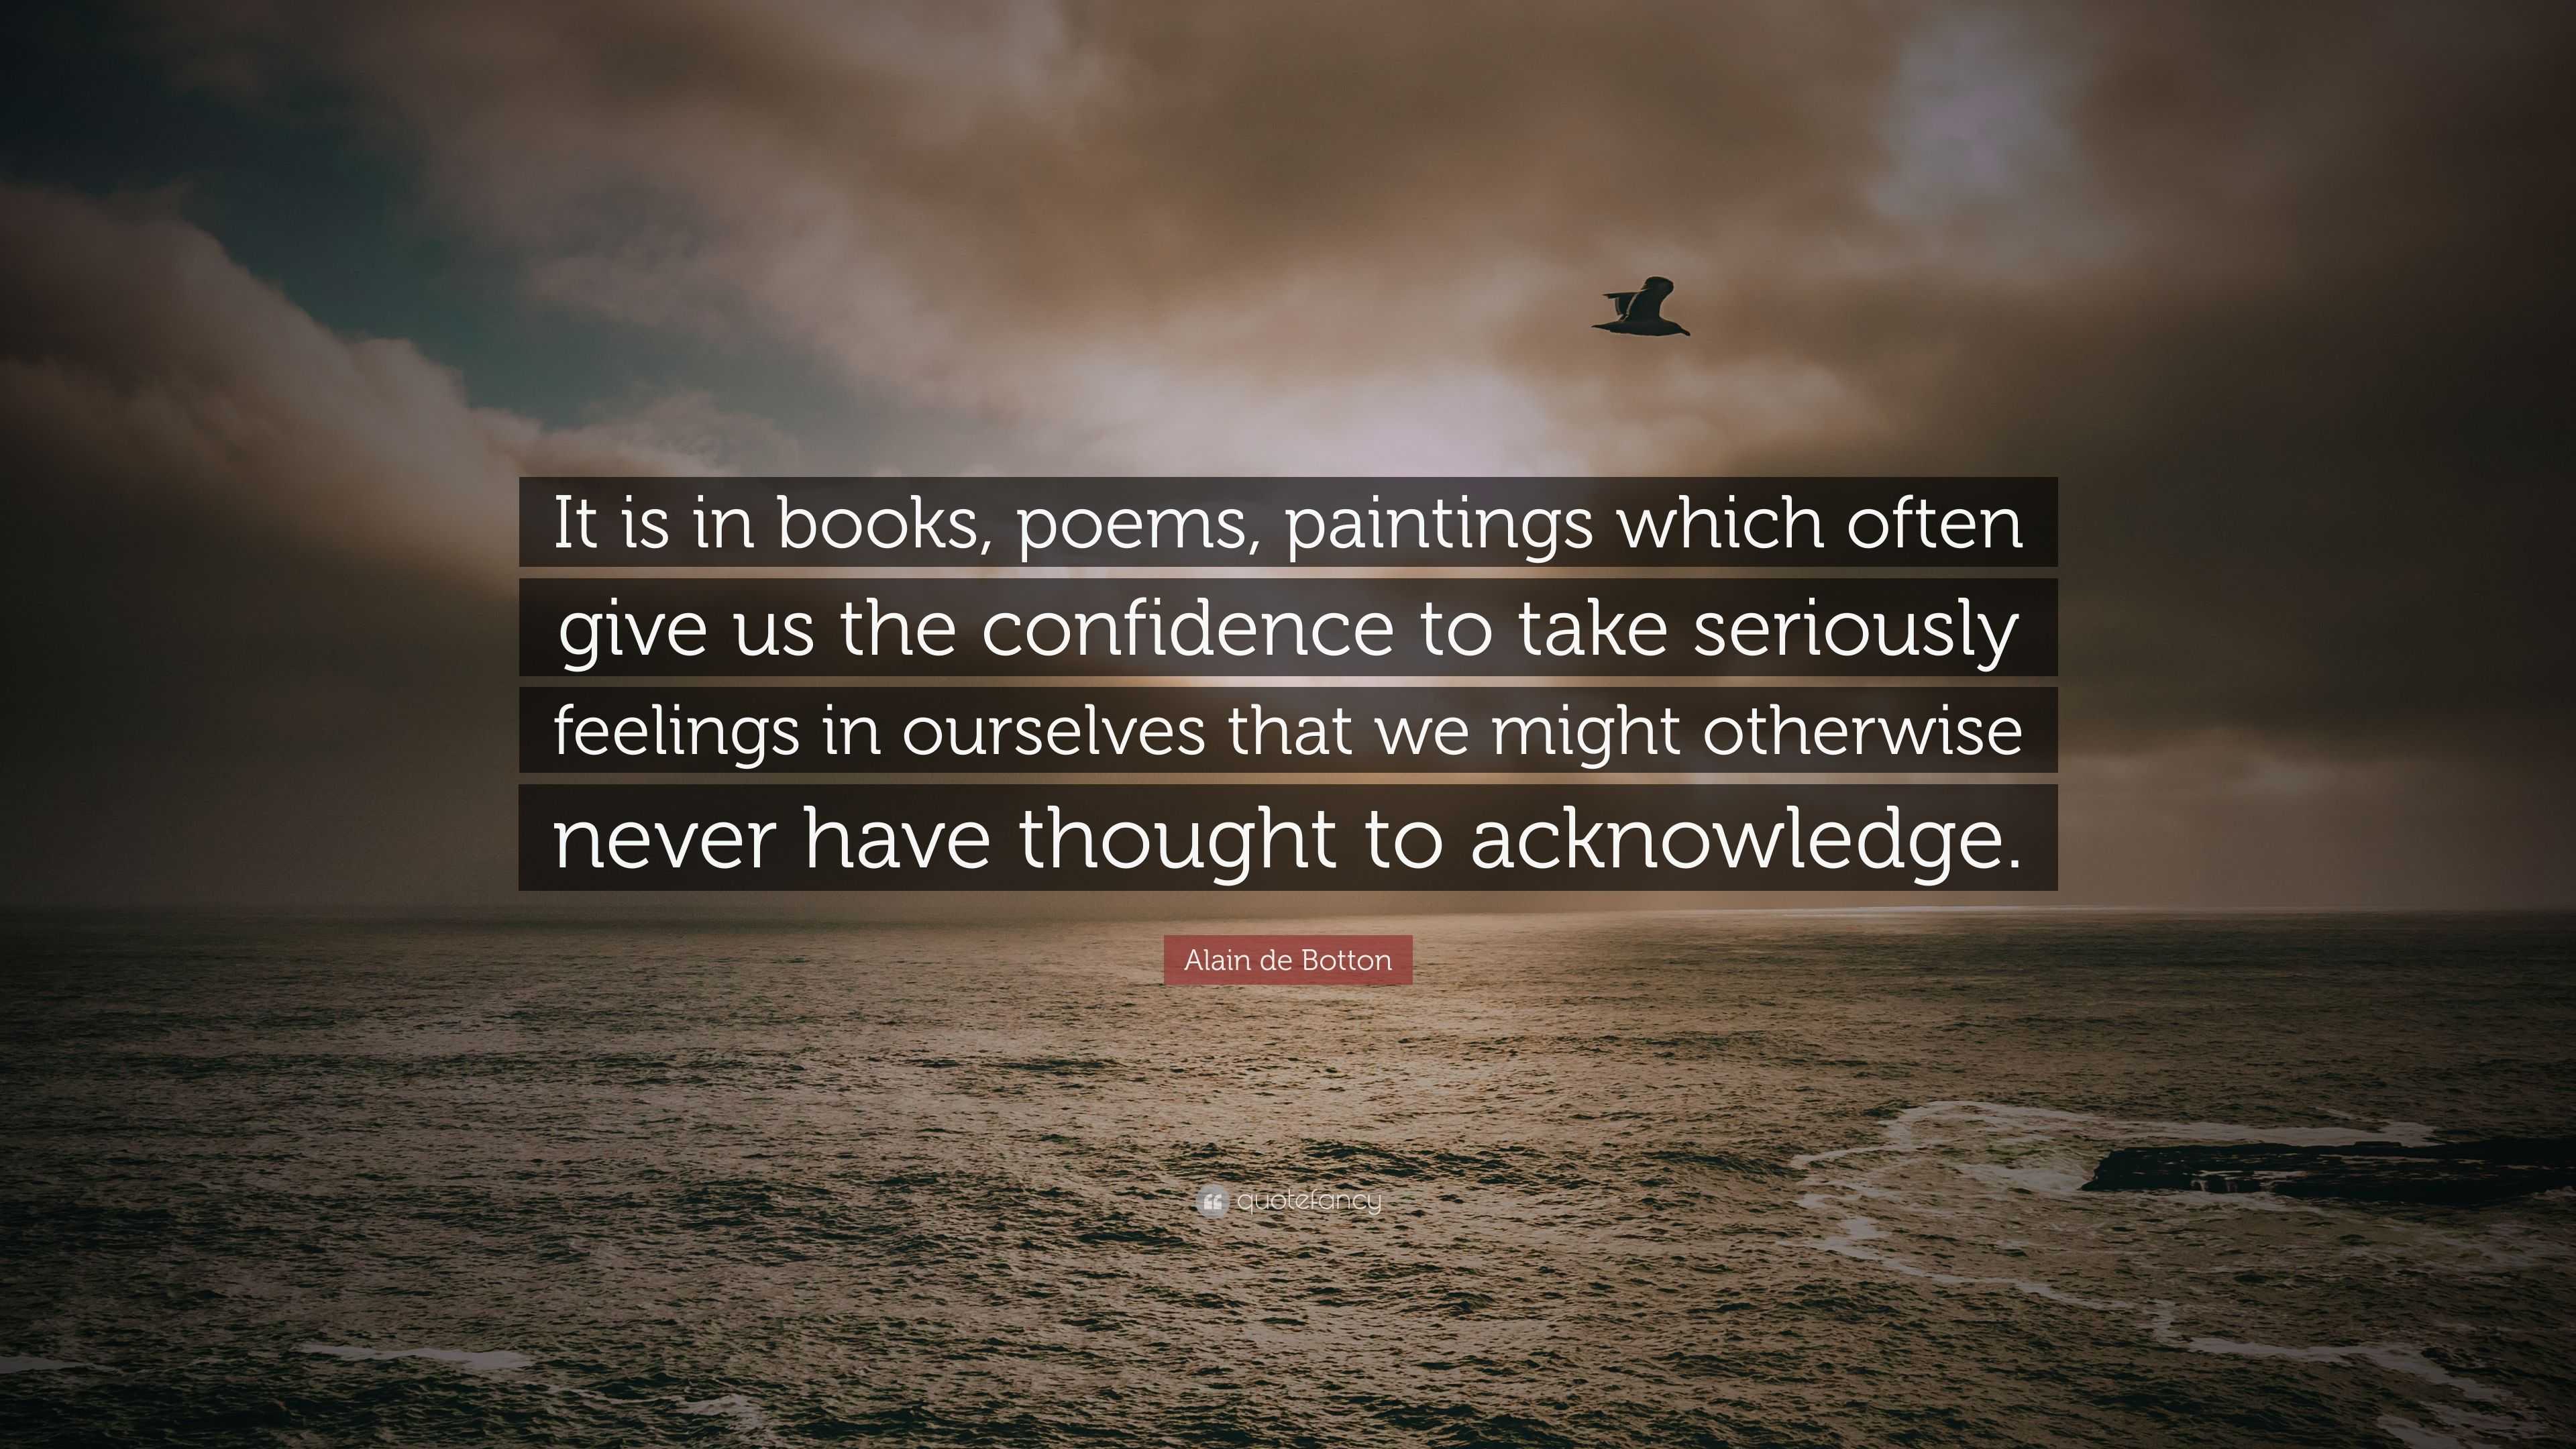 Alain de Botton Quote: “It is in books, poems, paintings which often